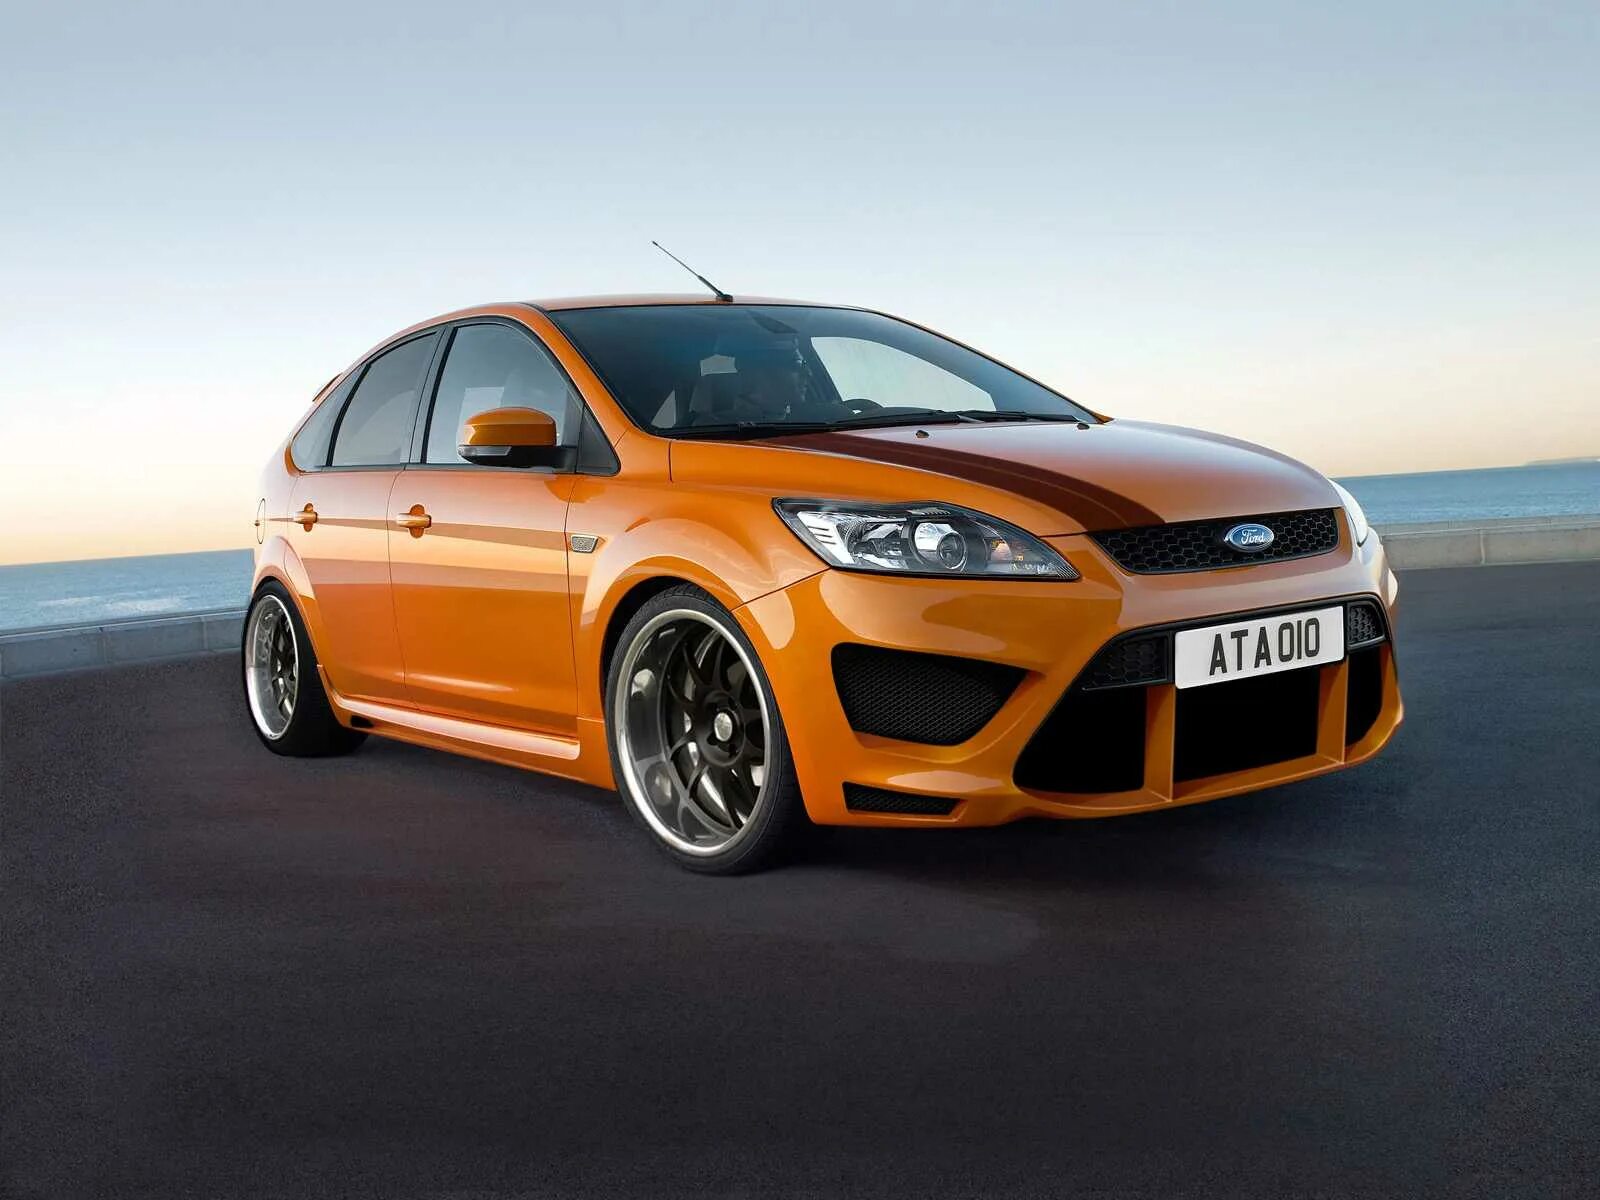 Ст тюнинг. Ford Focus 2 St. Ford Focus 2 St Рестайлинг. Ford Focus 2 Restyling. Ford Focus 2 St Restyling.